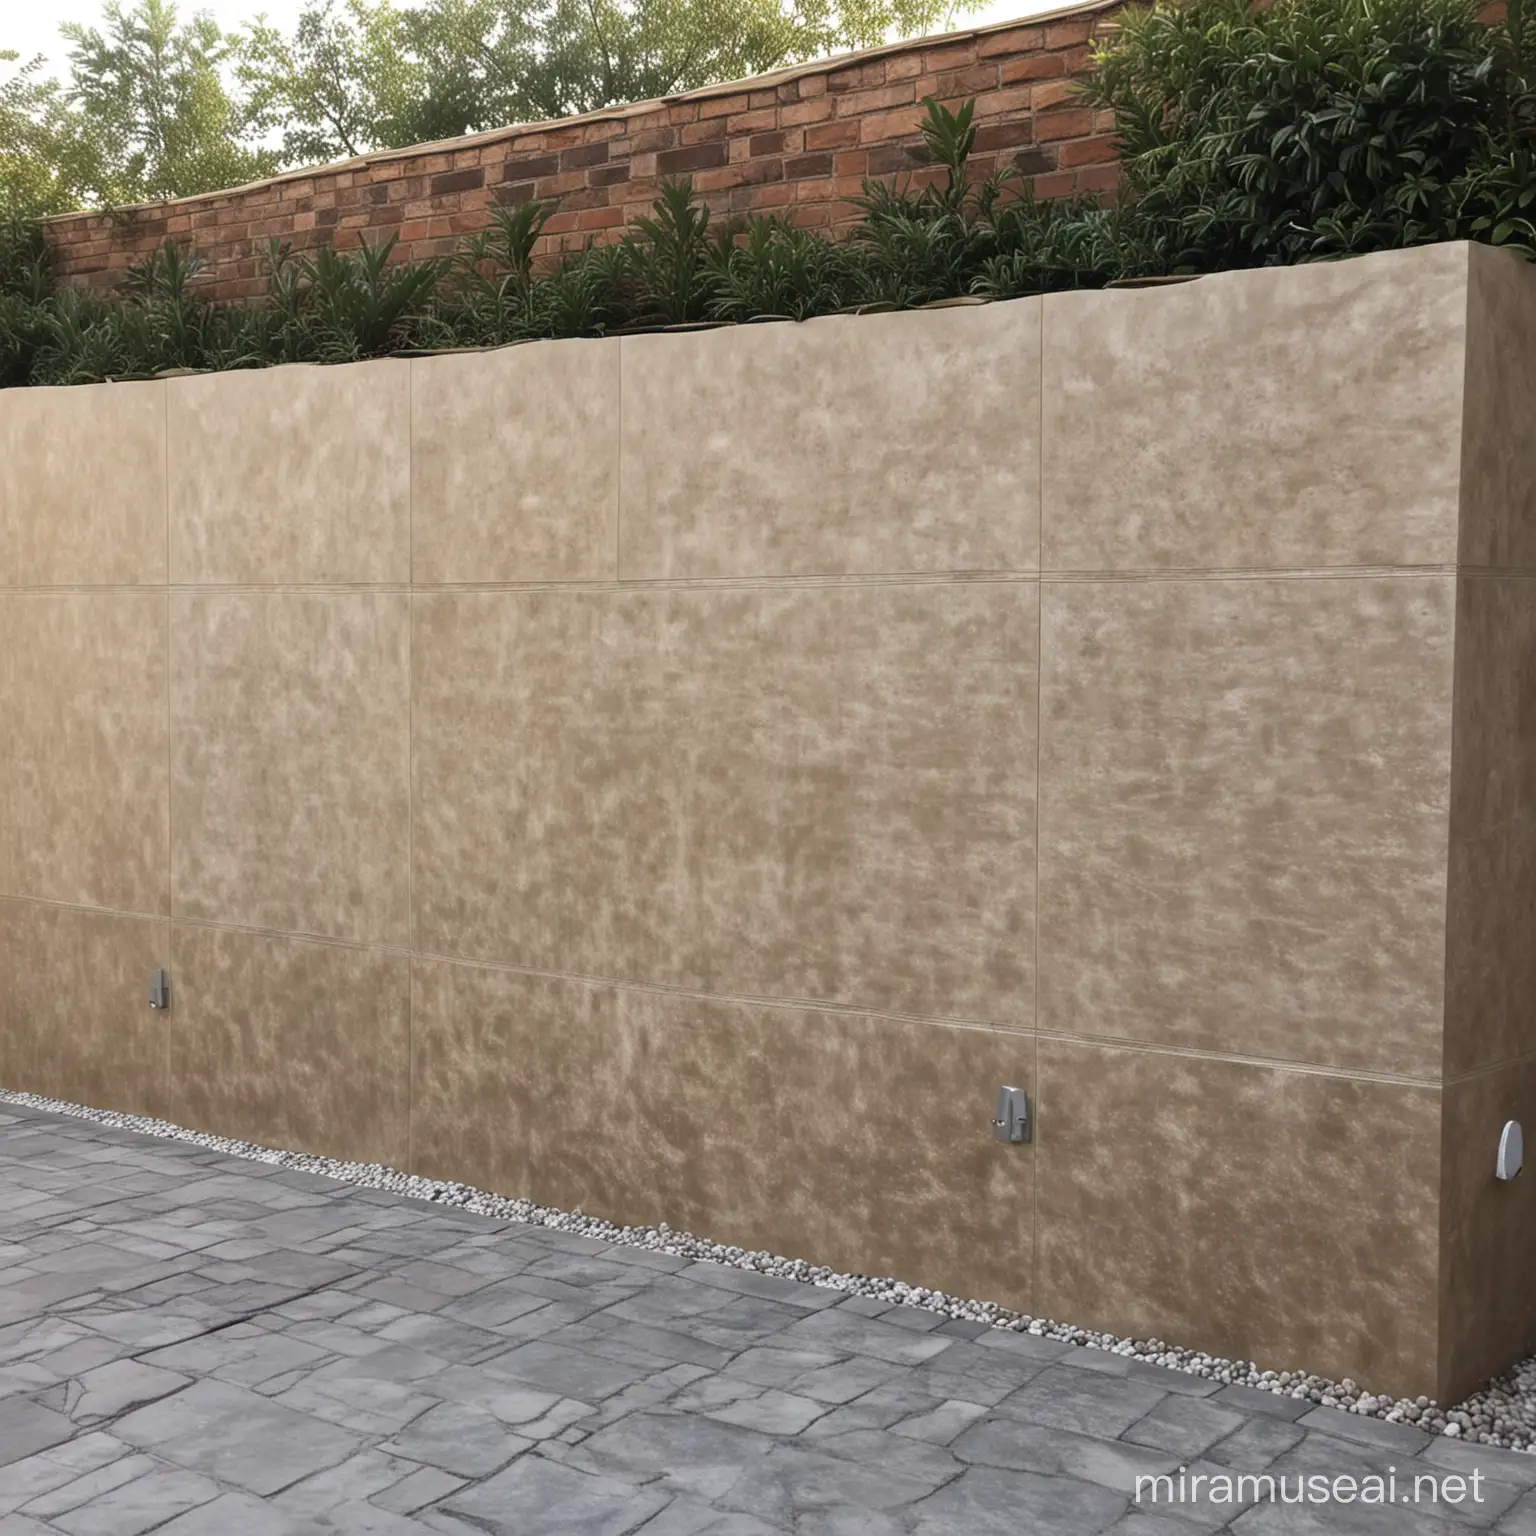 Exterior Wall of a Tranquil Massage Spa Business